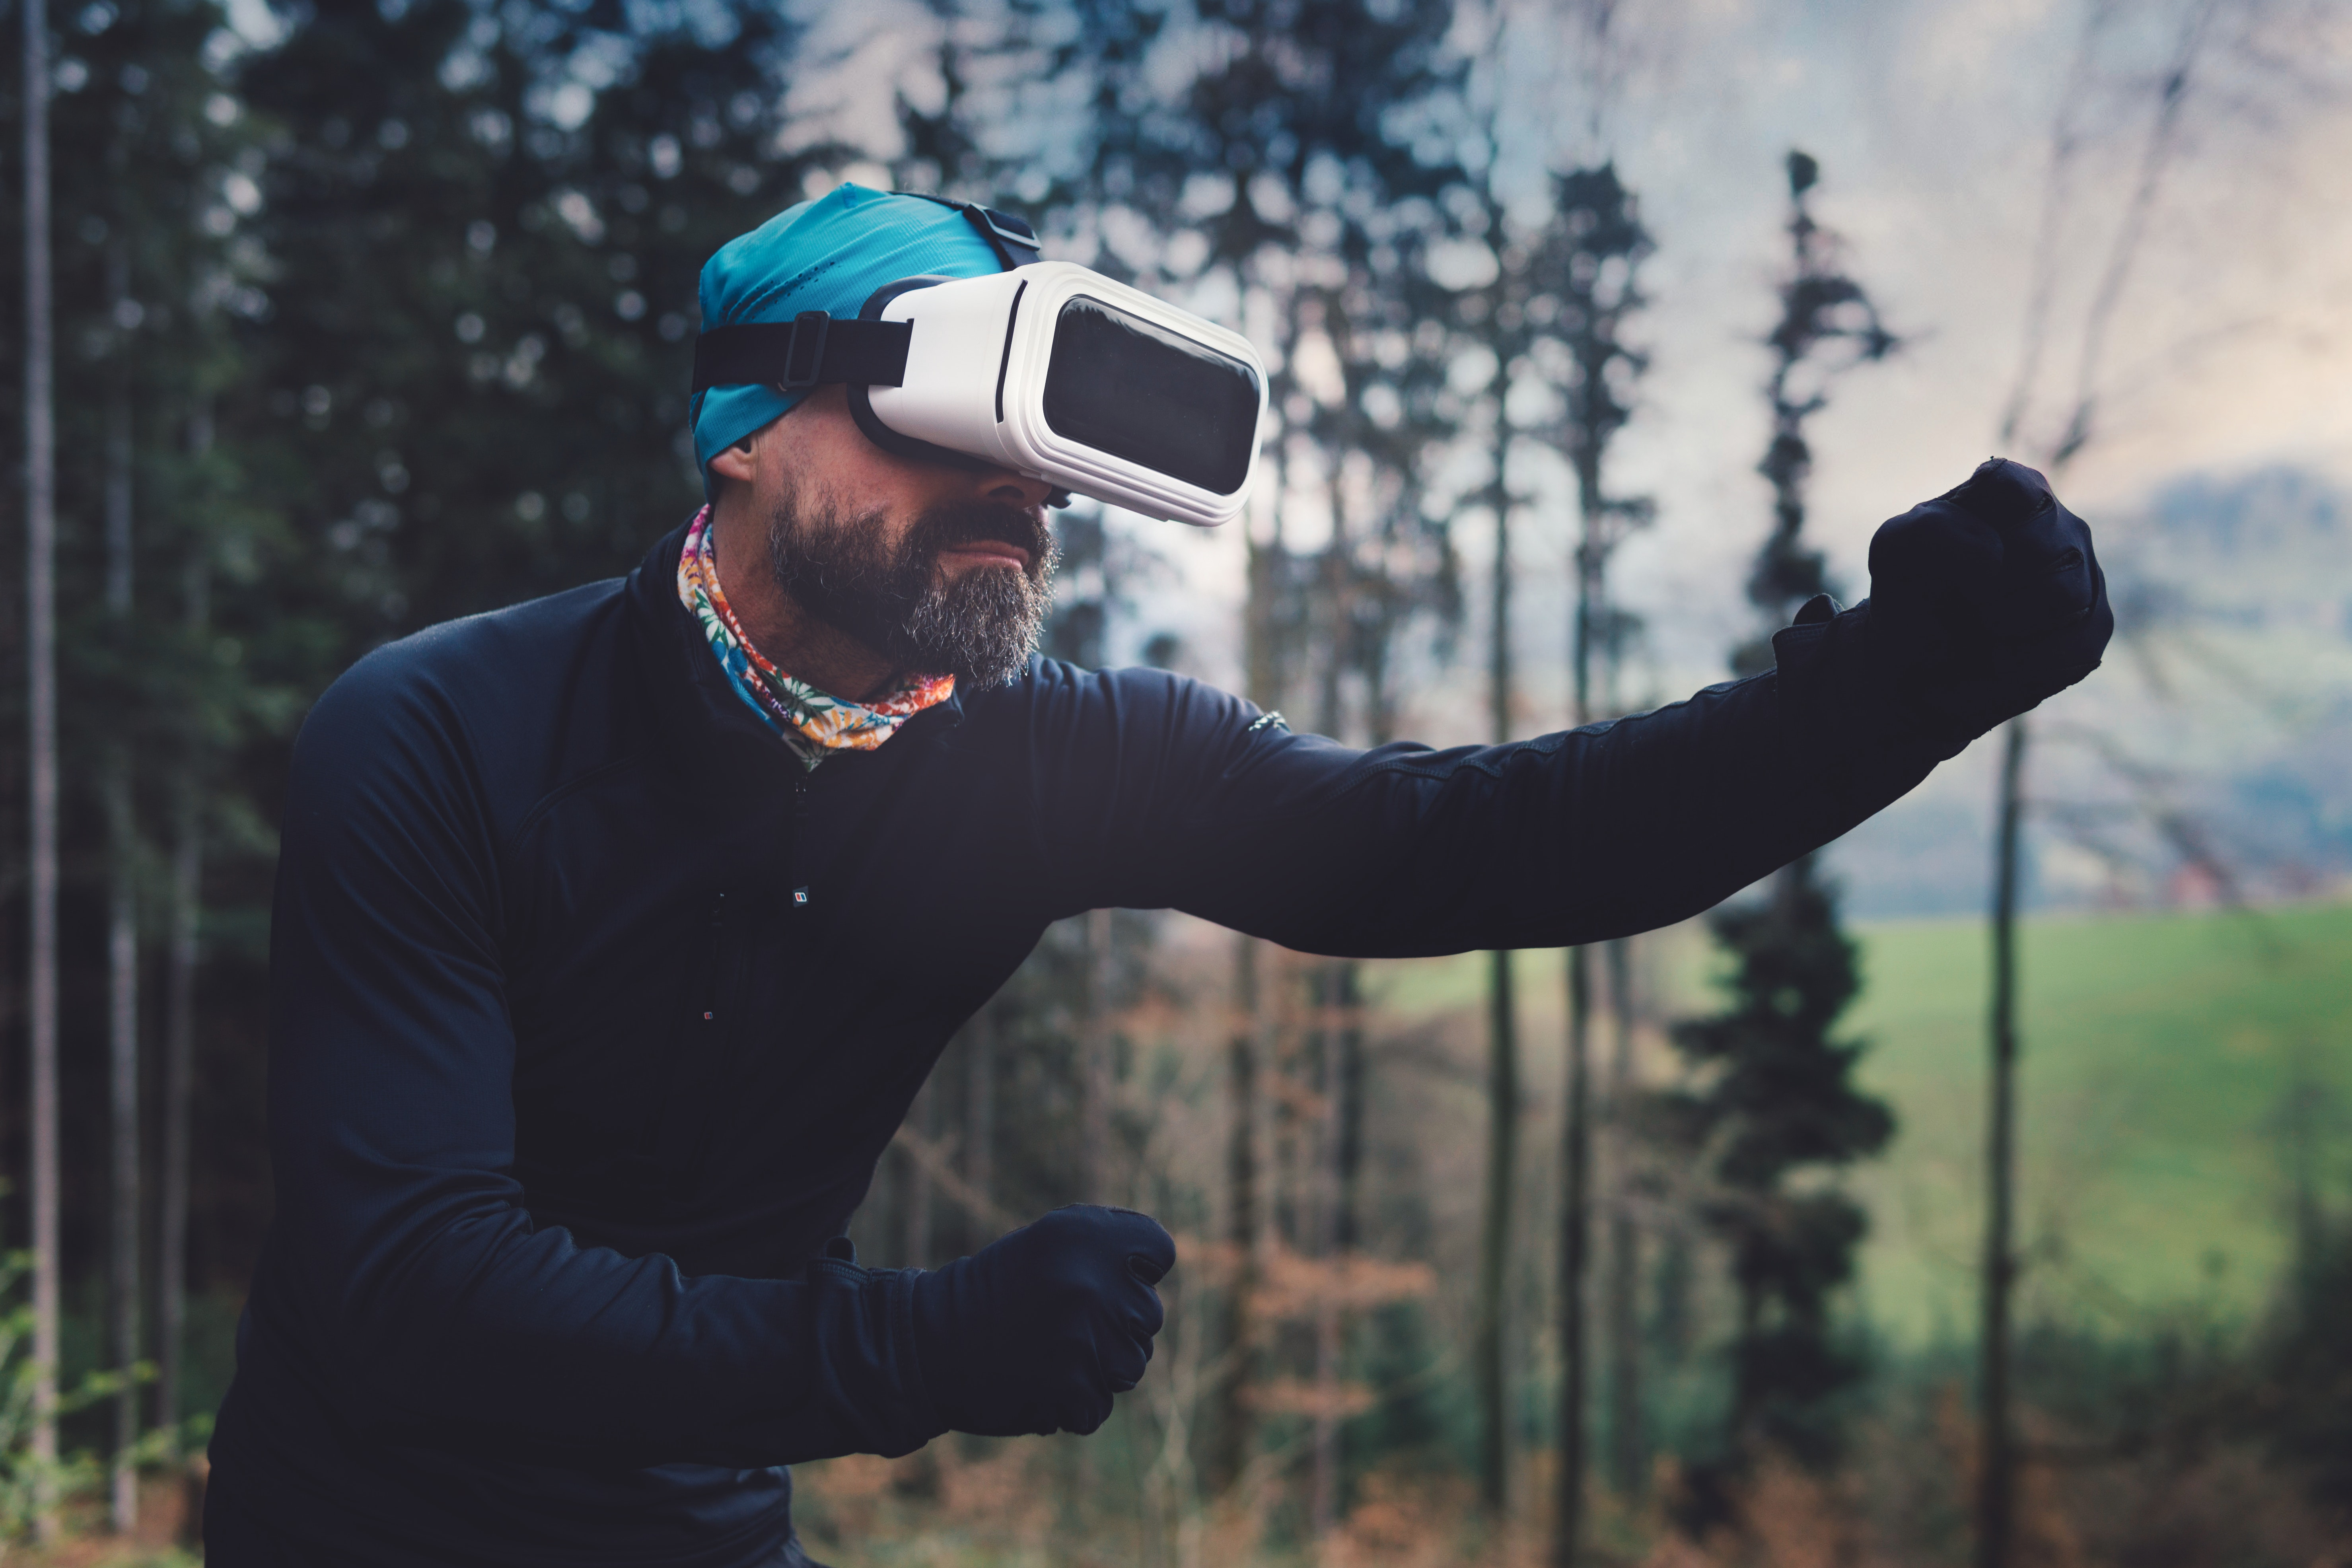 Free photo: Person Wearing Black Henley Shirt and White Vr Goggles ...